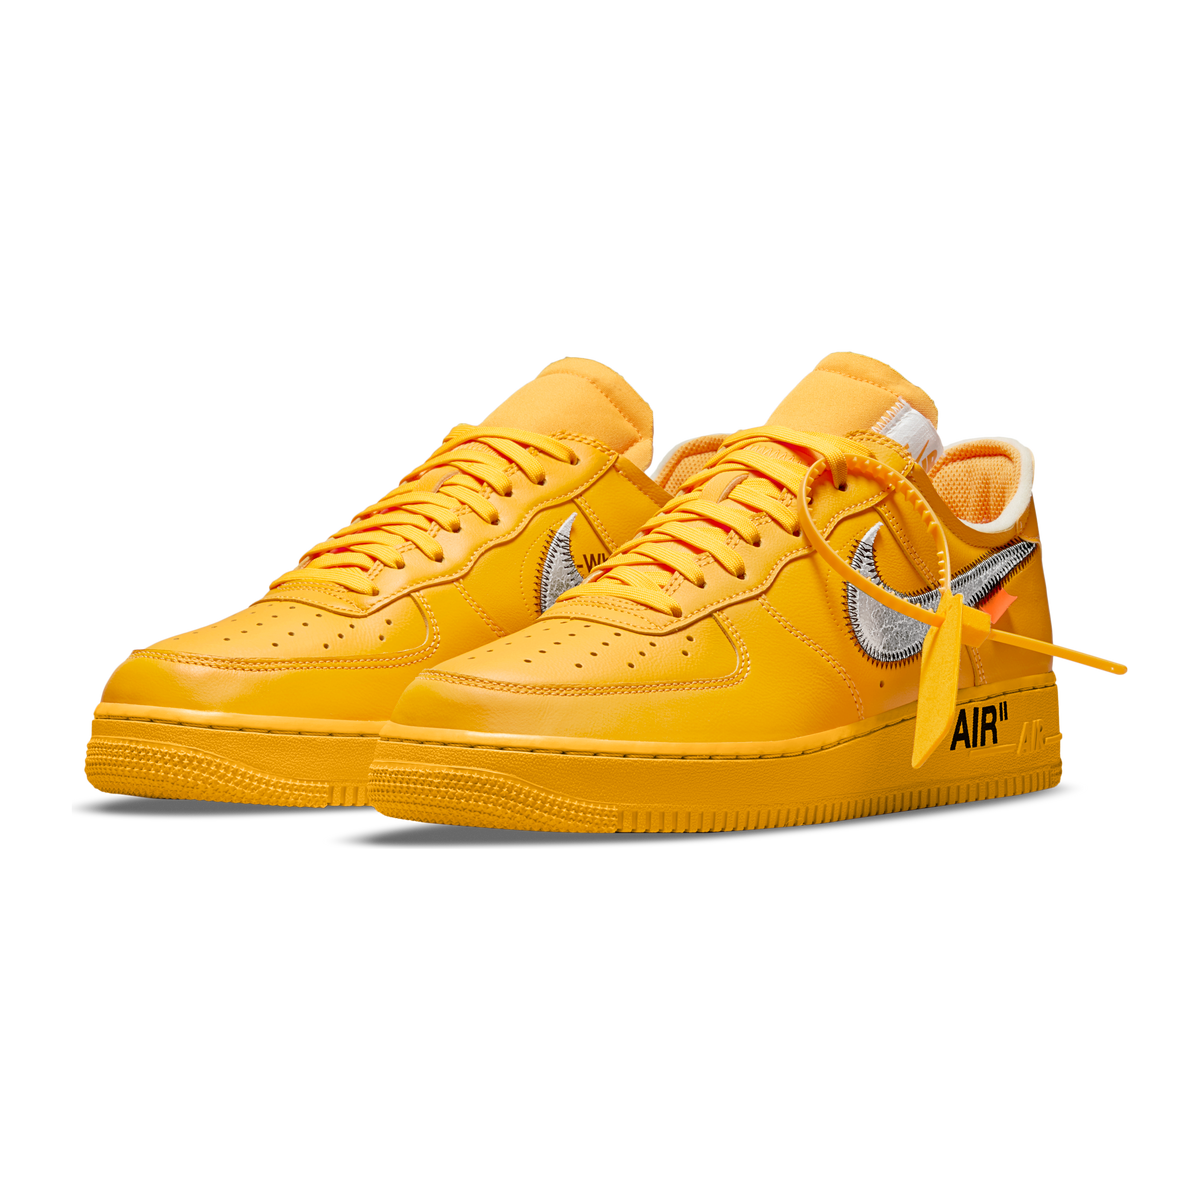 Is the Off-White x Nike Air Force 1 Low University Gold a Must